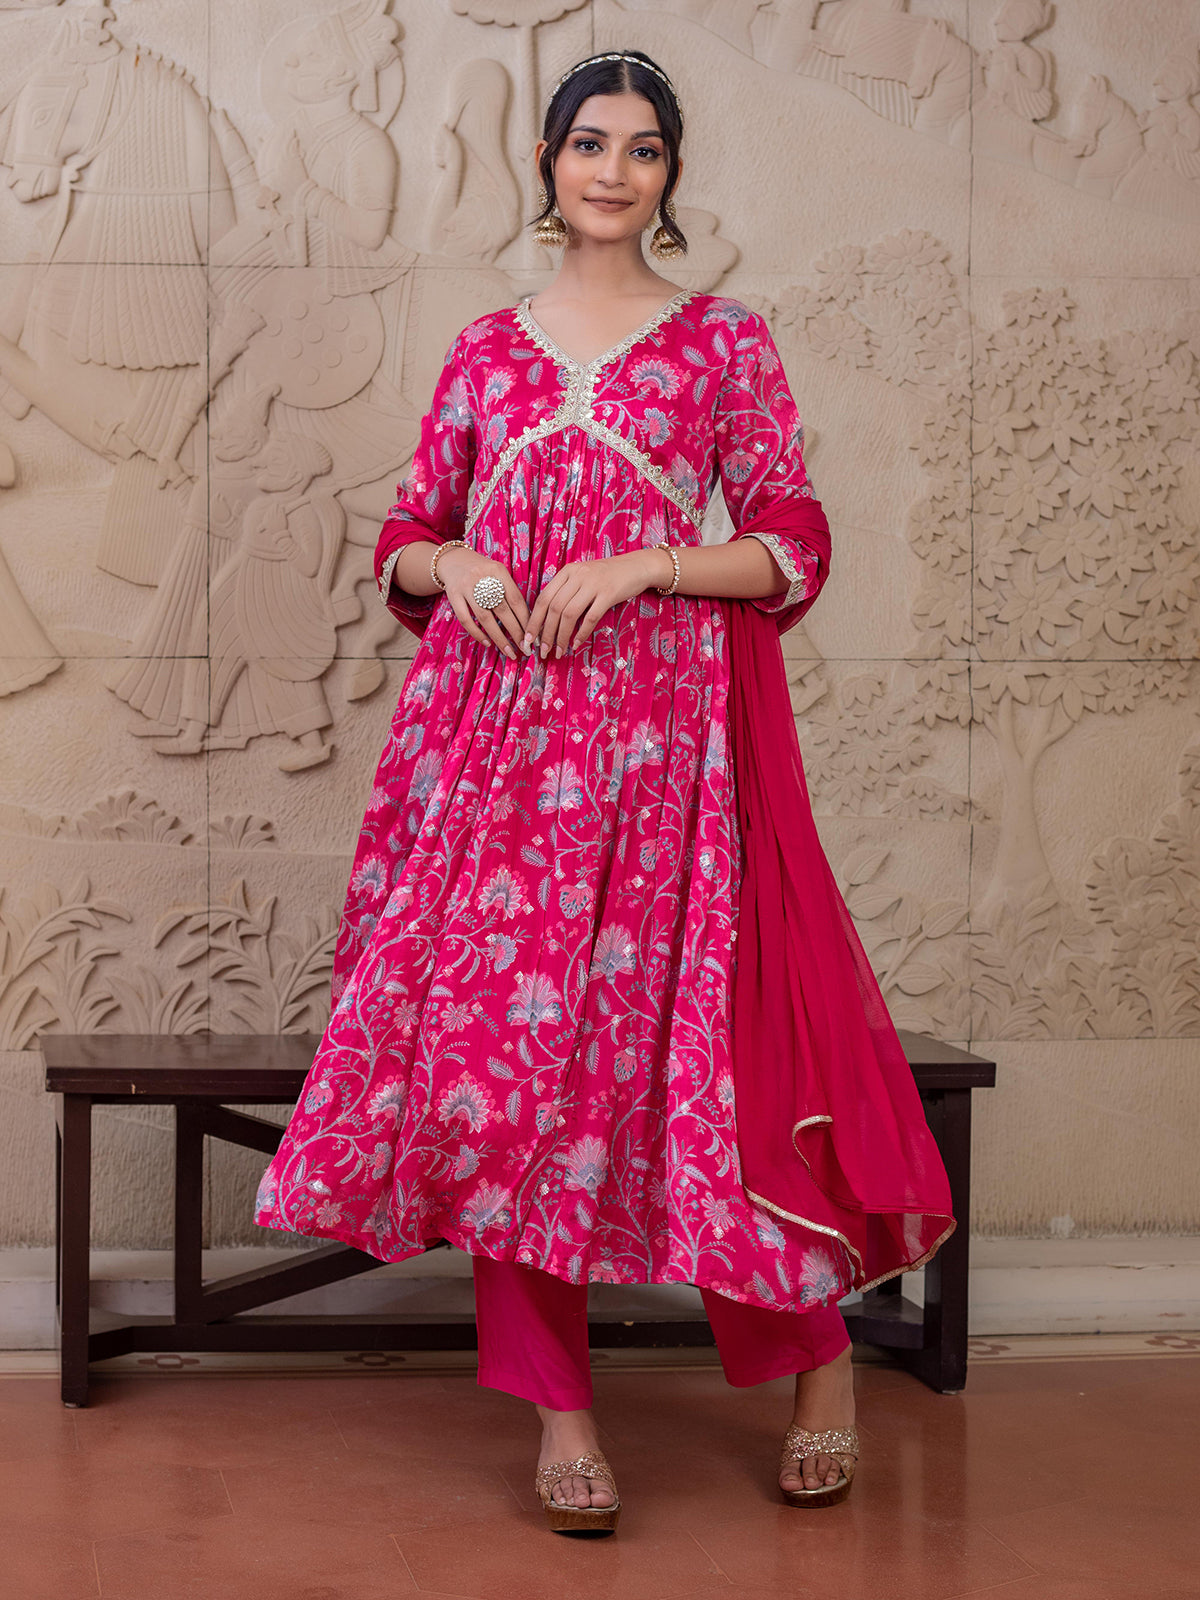 step-into-grace-with-our-pink-floral-jaal-printed-kurta-set-a-blend-of-delicate-florals-and-intricate-design-this-set-exudes-timeless-elegance-perfect-for-those-who-appreciate-beauty-in-simplicity